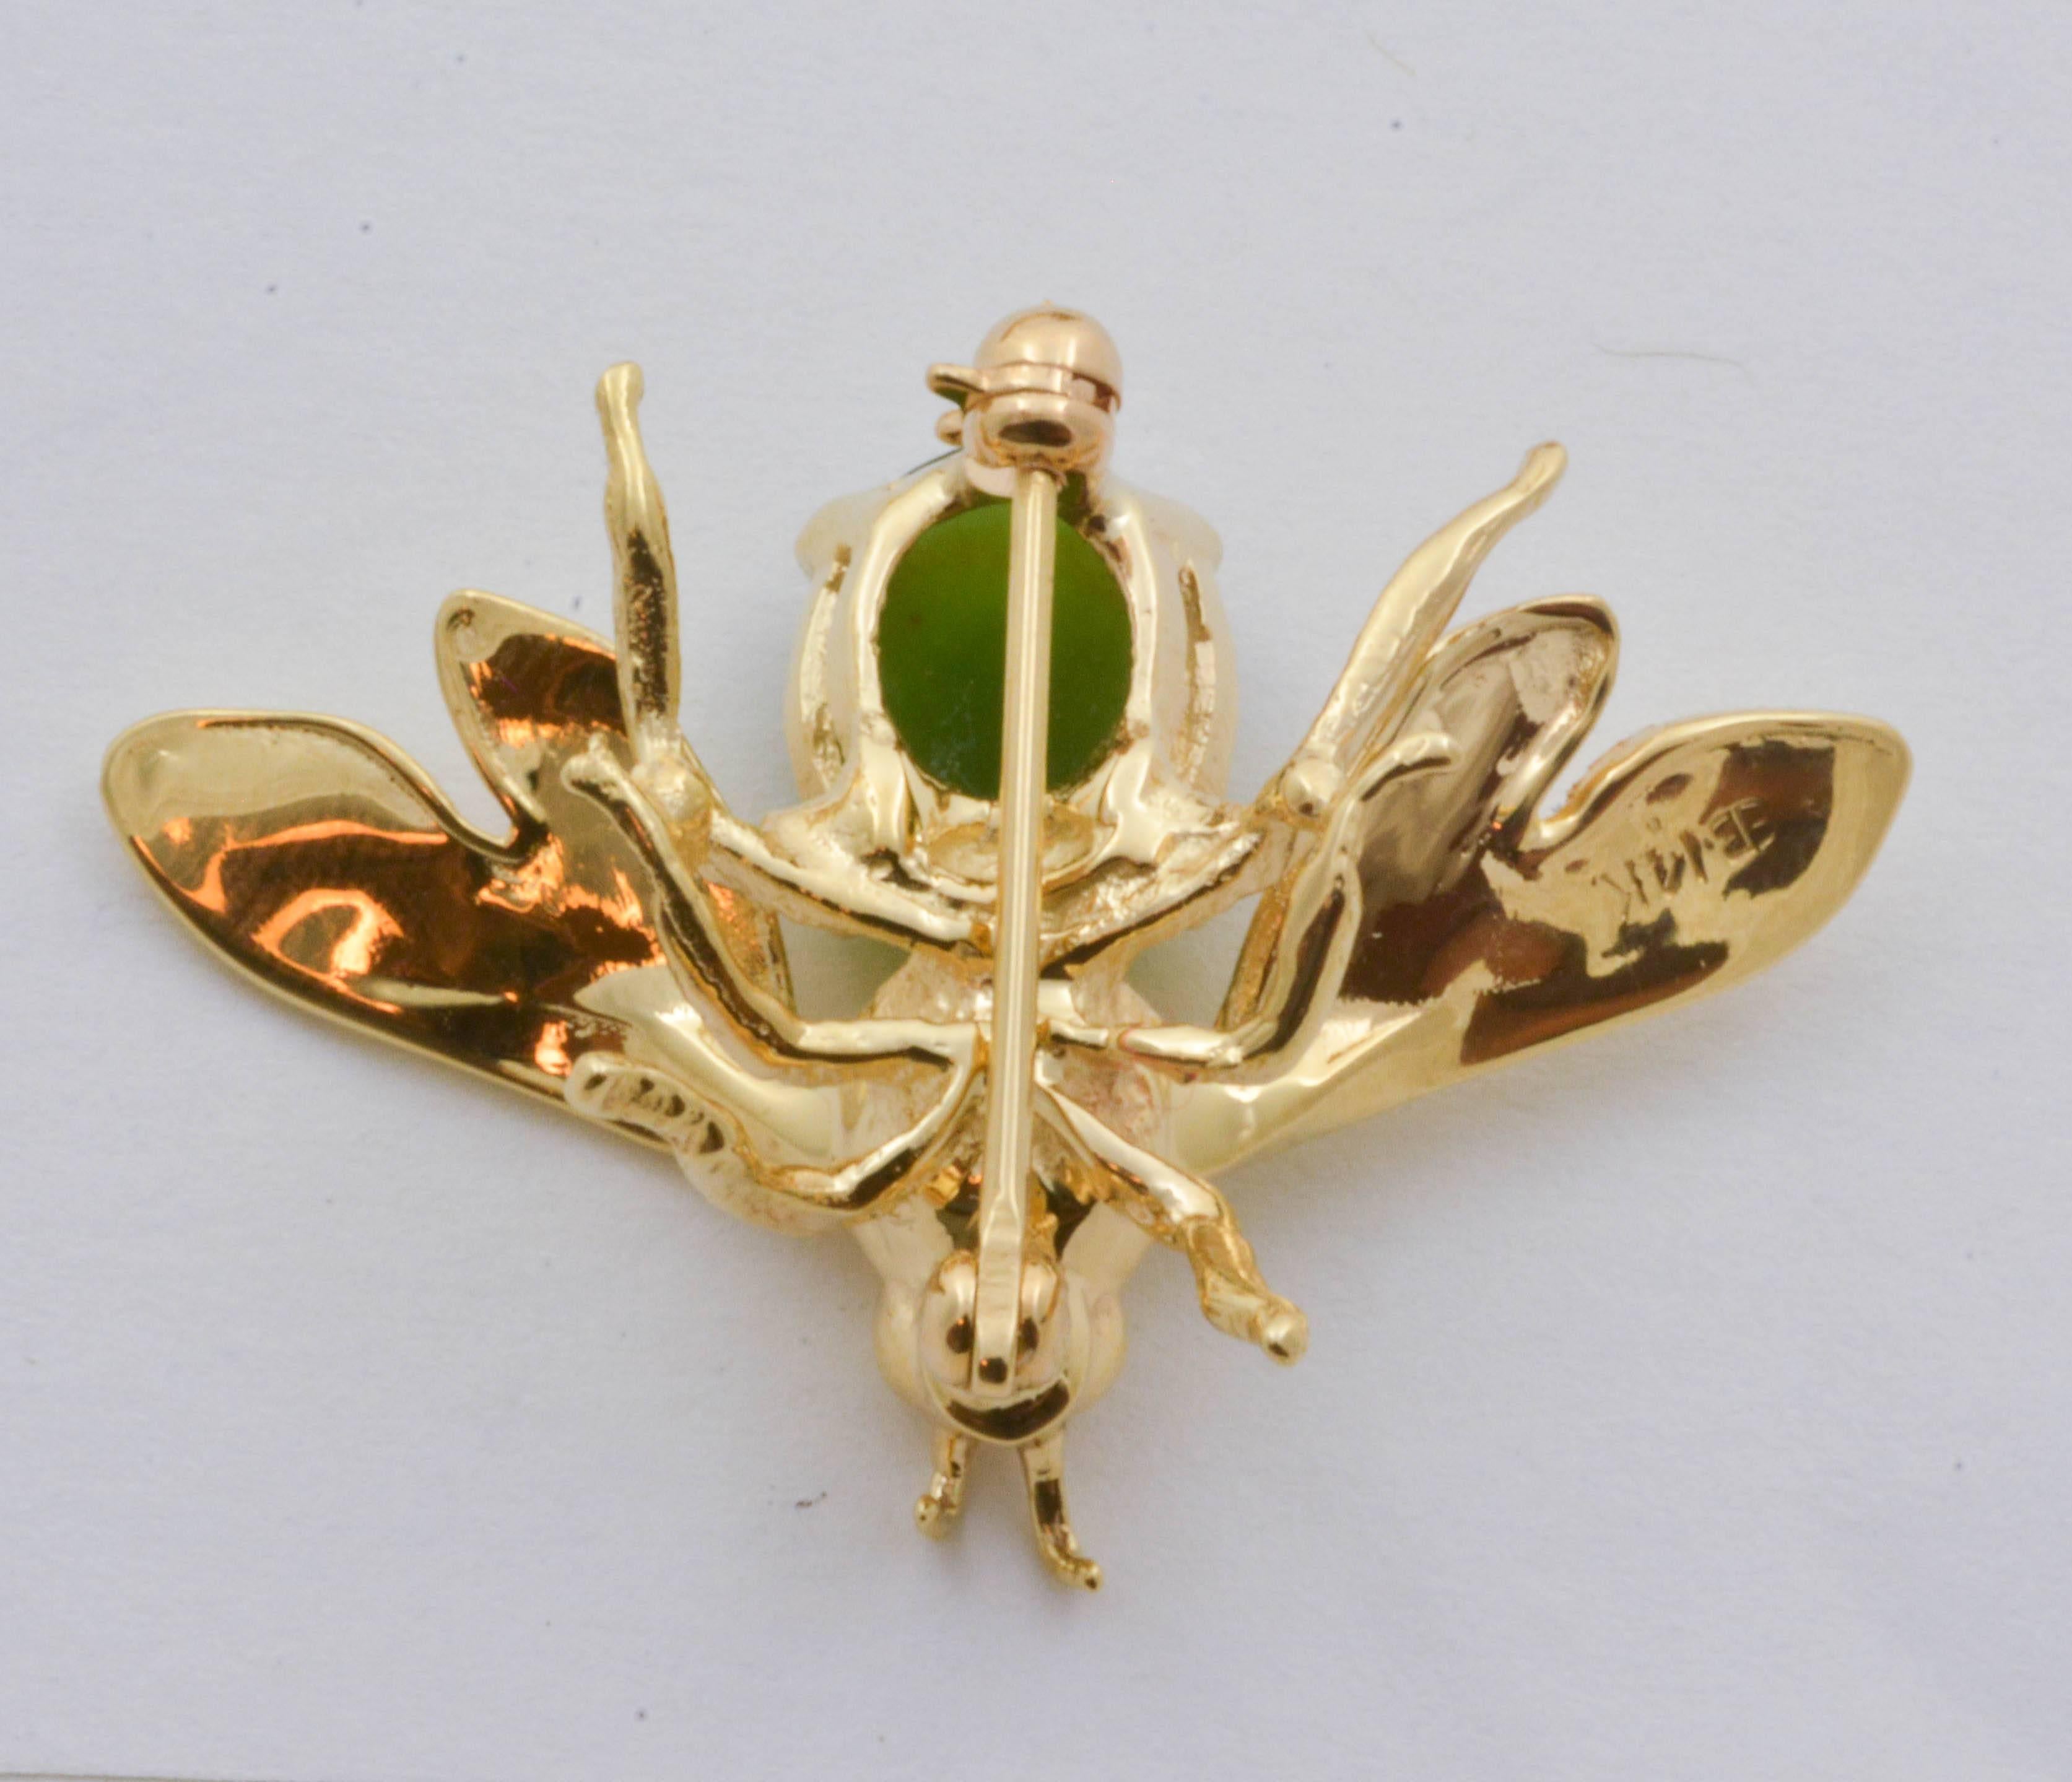 Crafted from 14kt yellow gold, this brooch creates a mesmerizingly life-like design with a 2.75 carat jade cabochon stone. The jade makes up part of an expertly crafted bee, and is securely set with a simple yet elegant four-prong mounting.